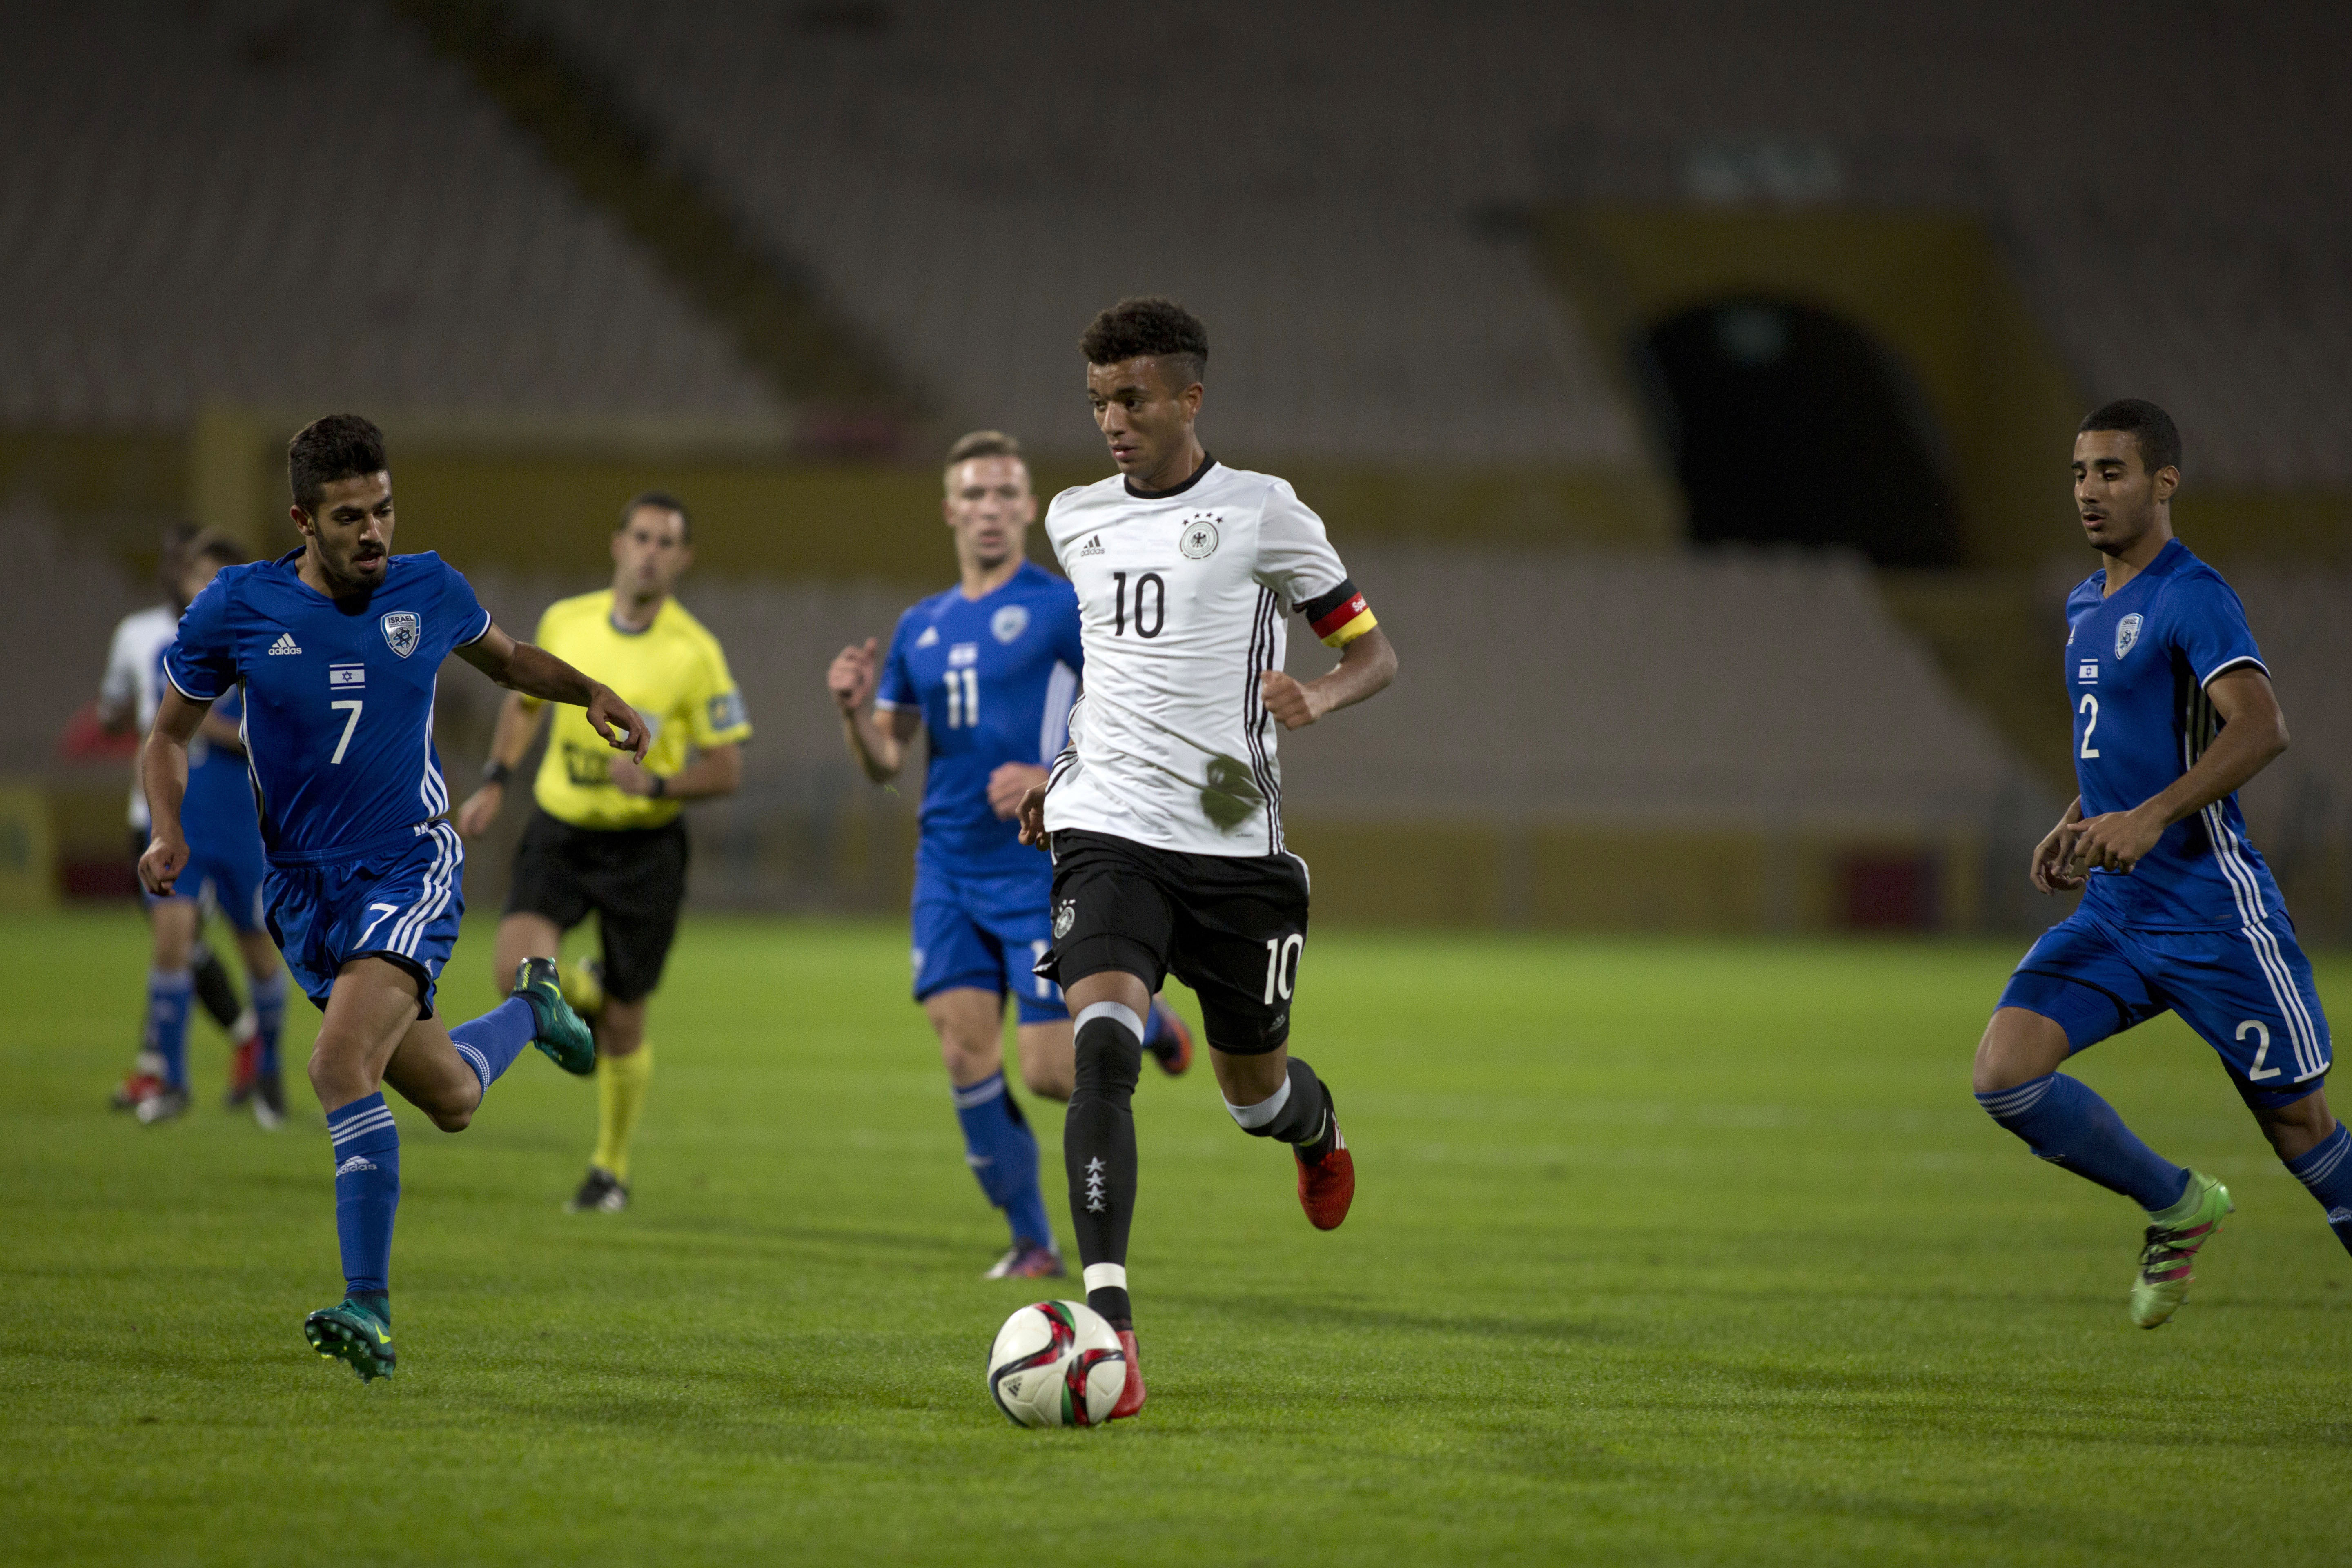 RAMAT GAN, ISRAEL - DECEMBER 13: Timothy Tillman of Germany challenges Ori Zohar of Israel during the Under 18 International Friendly match between Israel and Germany on December 13, 2016 in Ramat Gan, Israel.  (Photo by Lior Mizrahi/Bongarts/Getty Images)